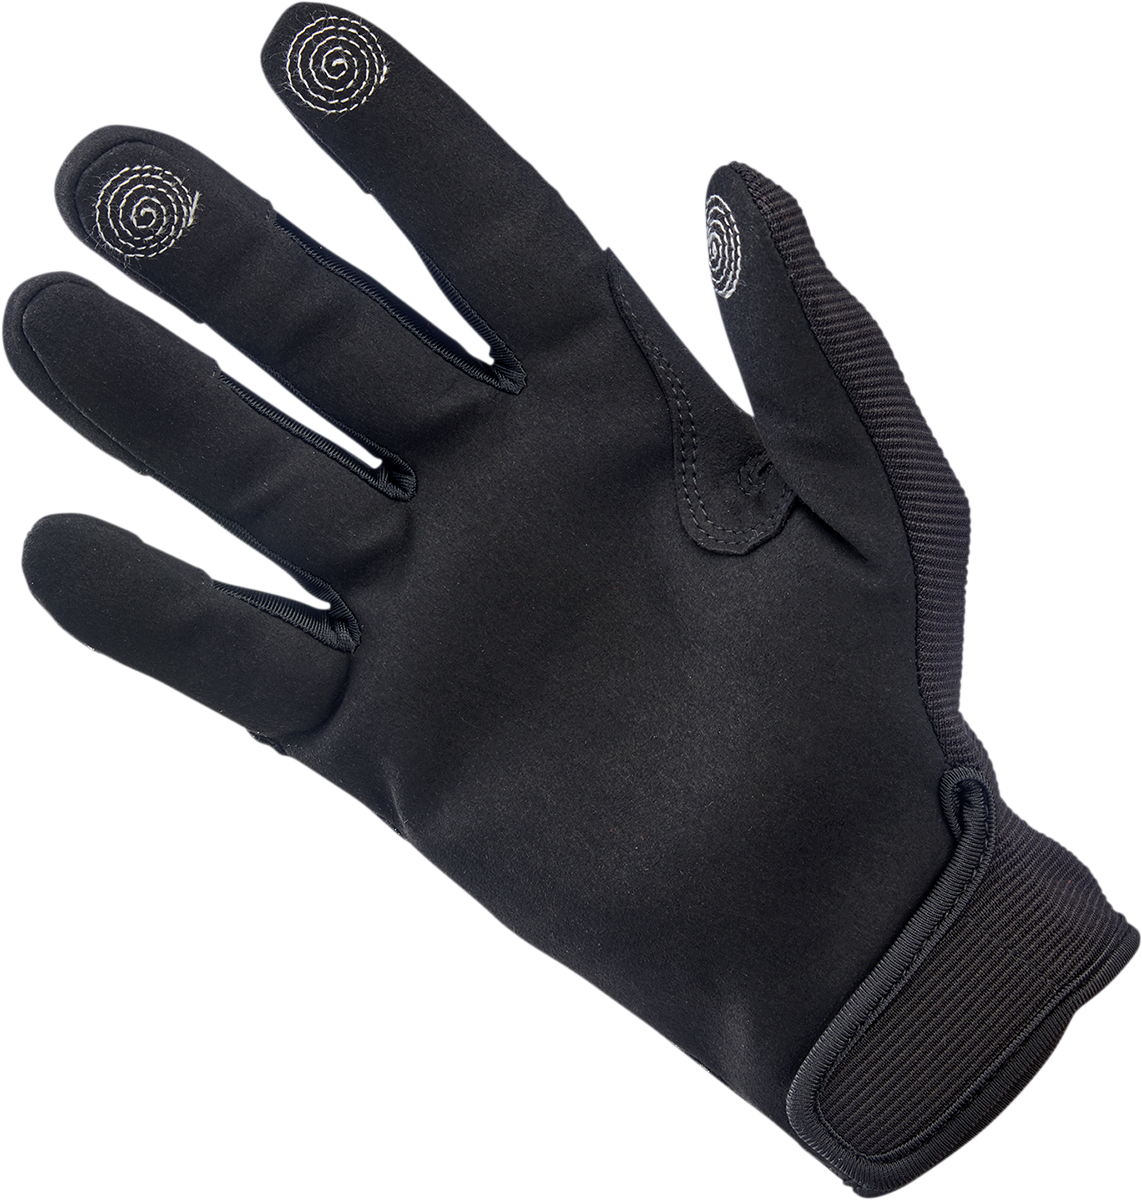 BILTWELL Anza Gloves - Black Out - Large 1507-0101-004